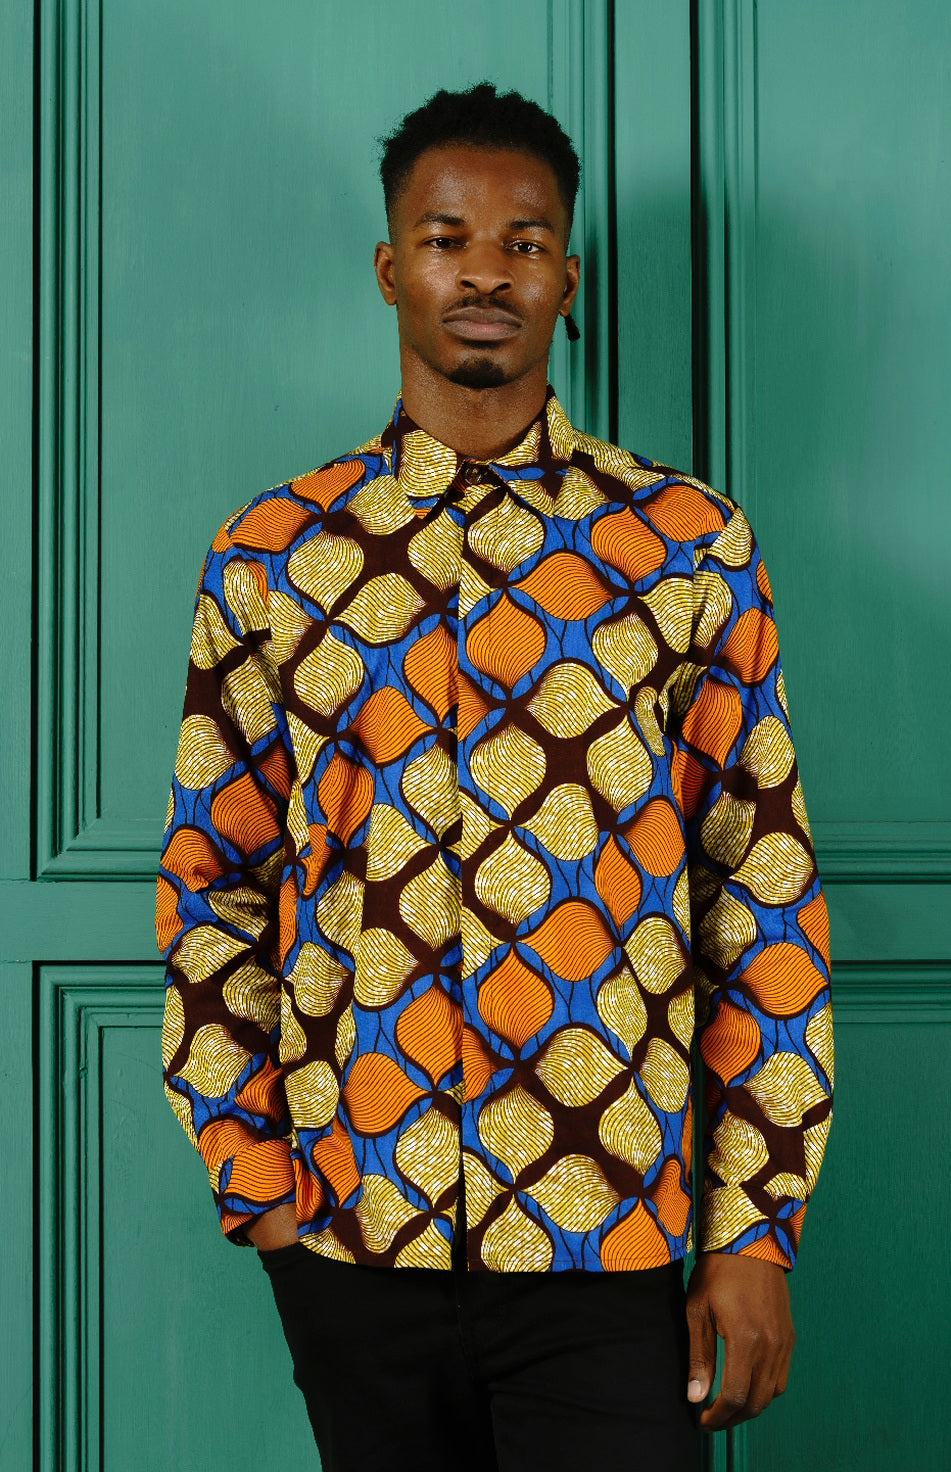 Men's Relaxed fit Long sleeve African print shirt-Blue Onion - OHEMA OHENE AFRICAN INSPIRED FASHION